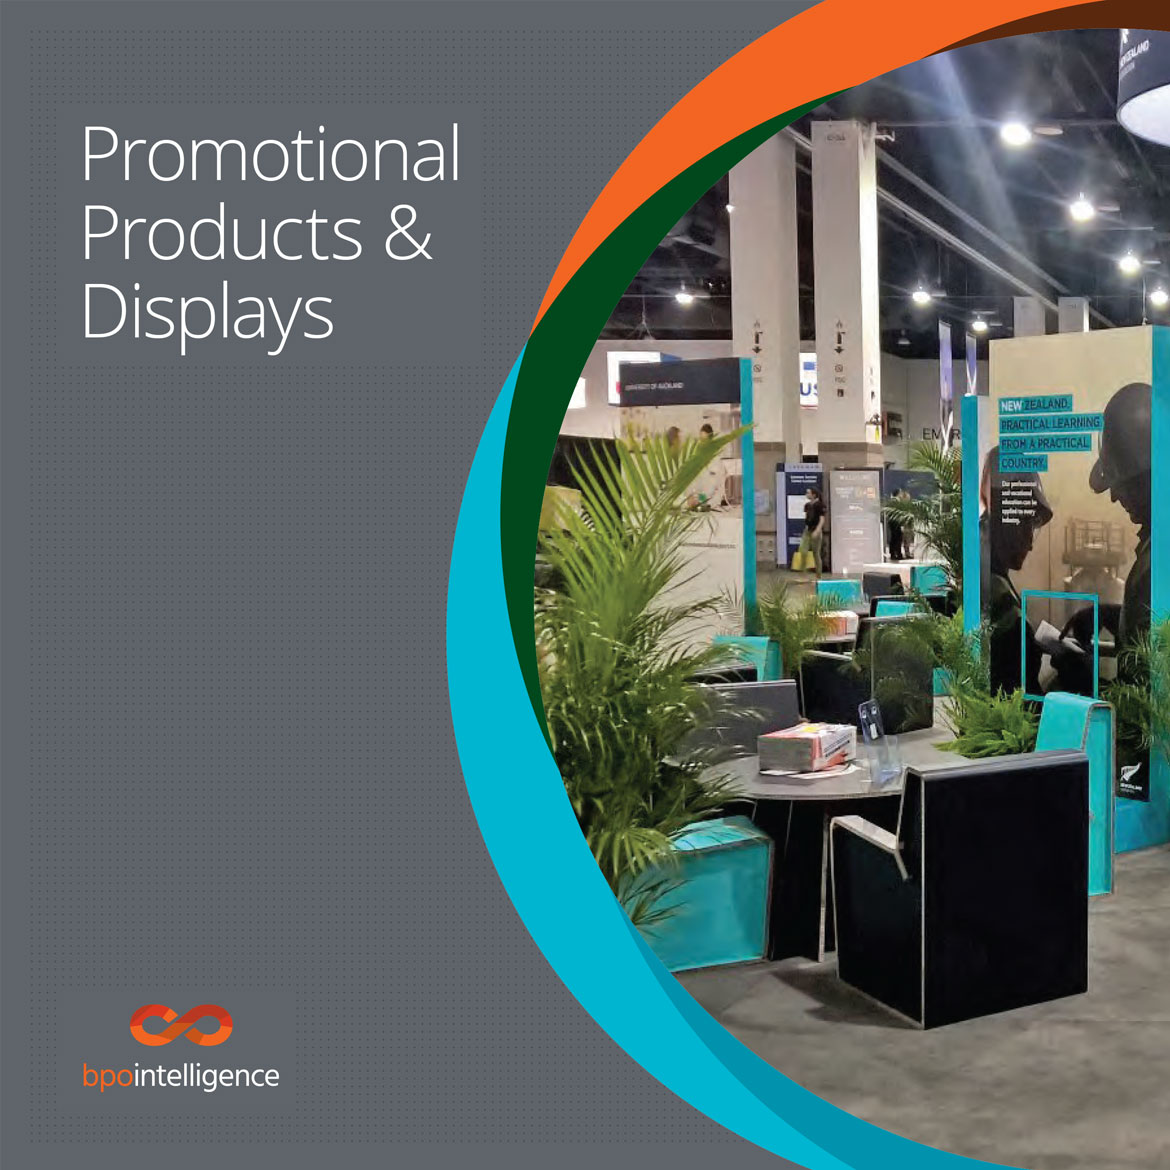 BPO Intelligence Promotional Products and Displays Brochure